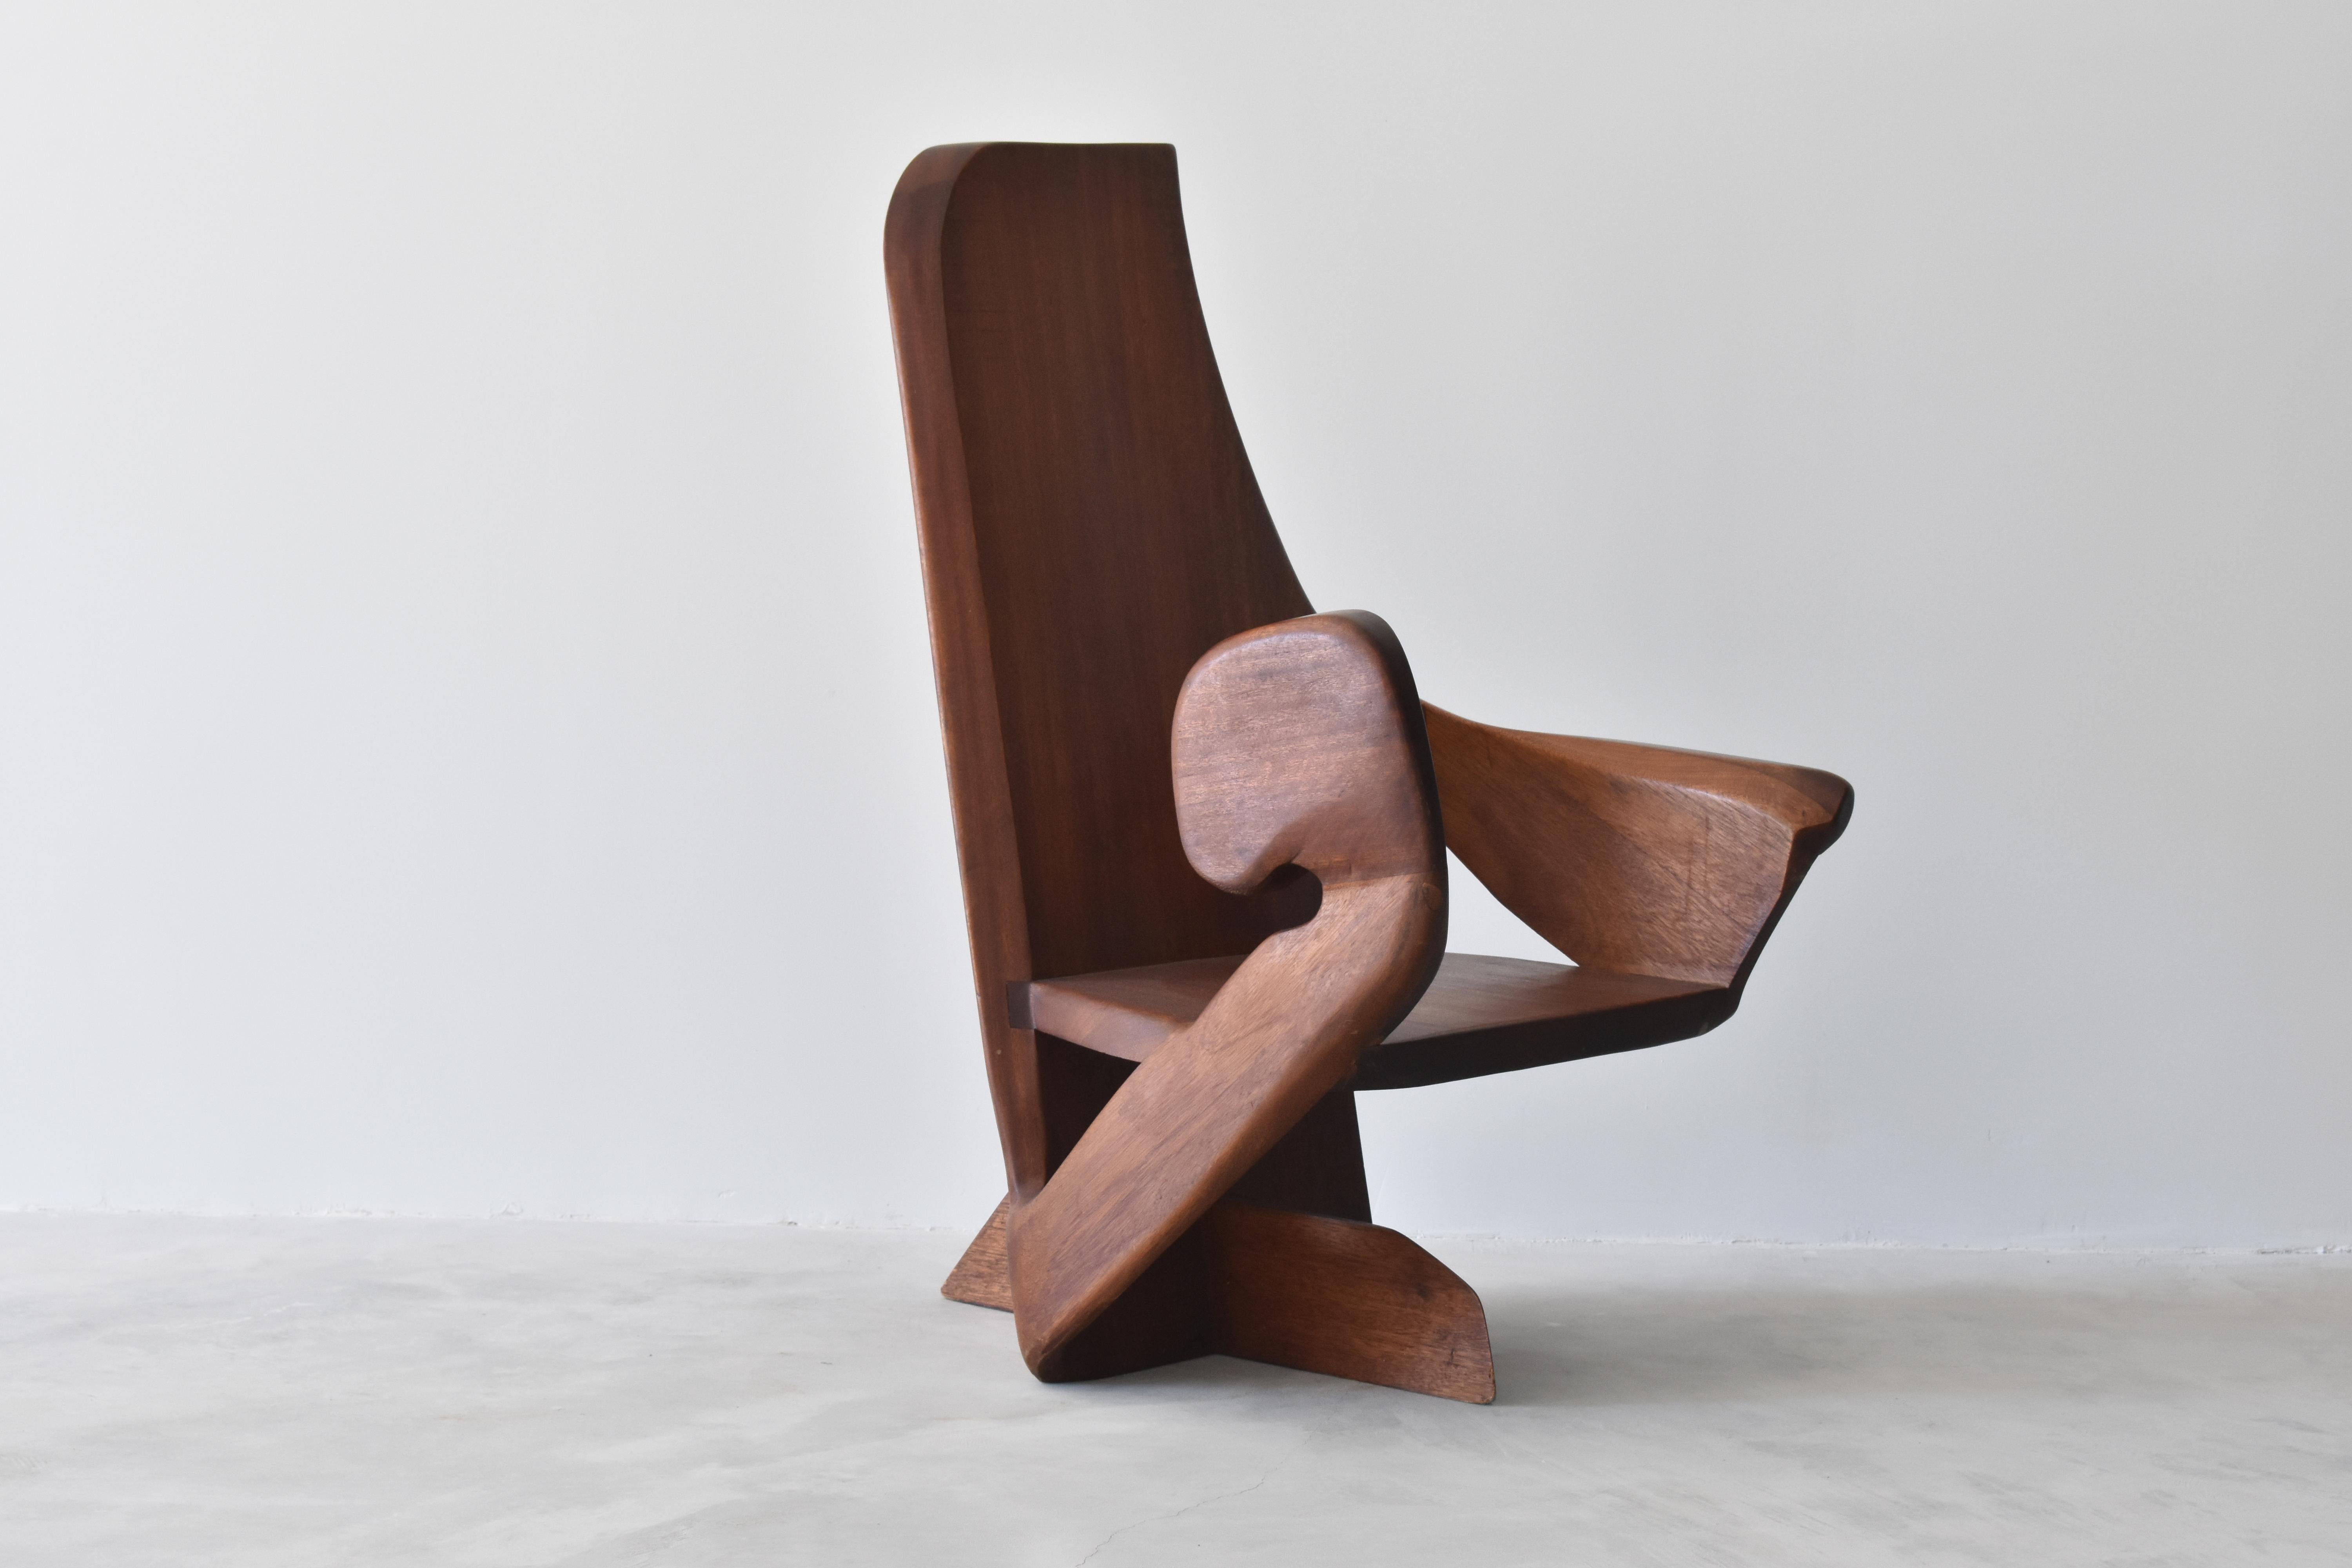 Post-Modern Unknown Studio Craftsman, Armchair in Sculpted and Joined Hardwood Slabs, 1980s